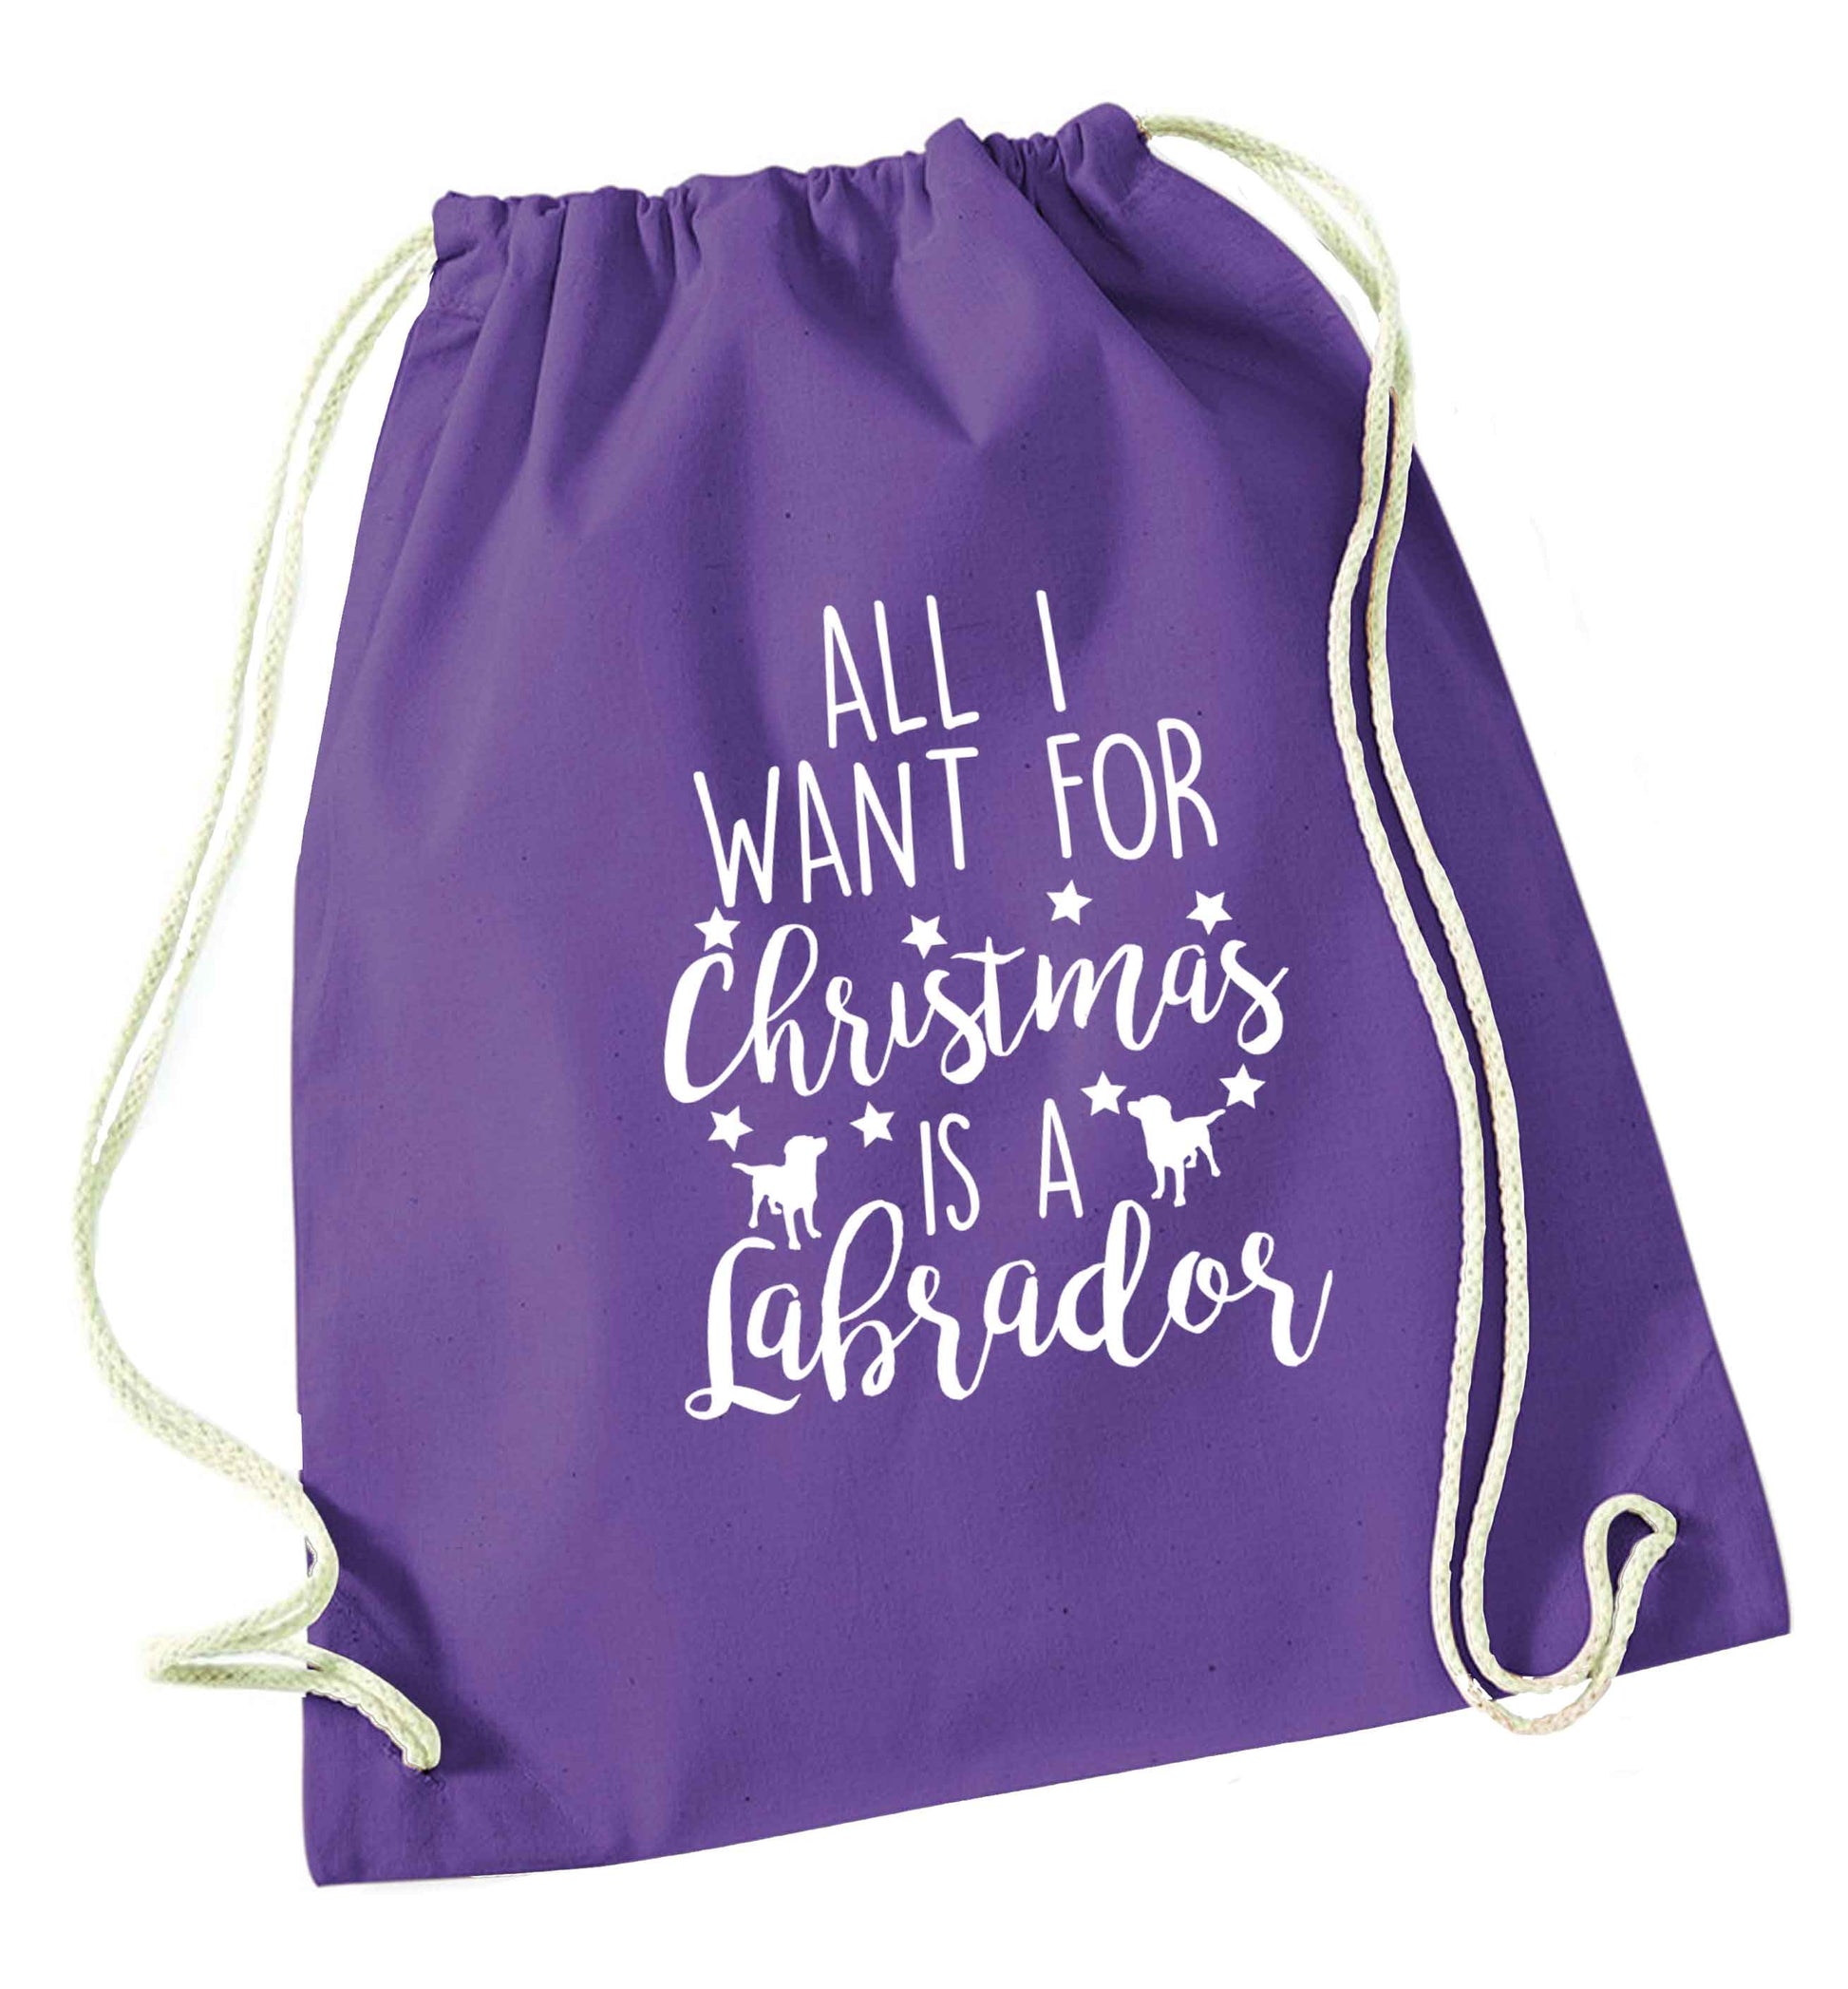 All I want for Christmas is a labrador purple drawstring bag